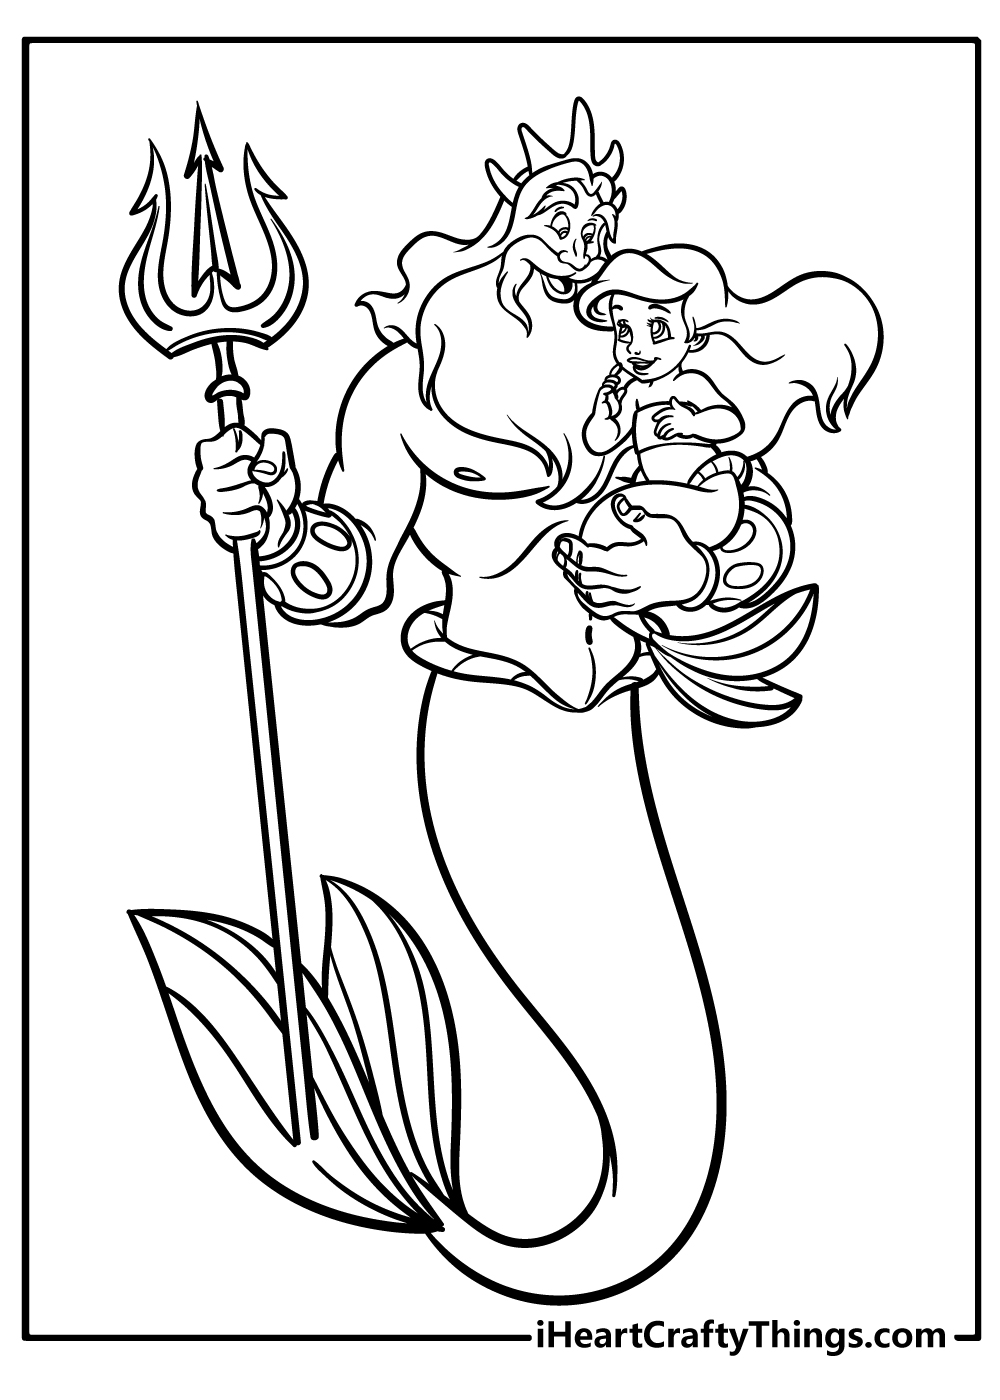 Ariel Coloring Pages Best Coloring Pages For Kids Ariel - Otakugadgets